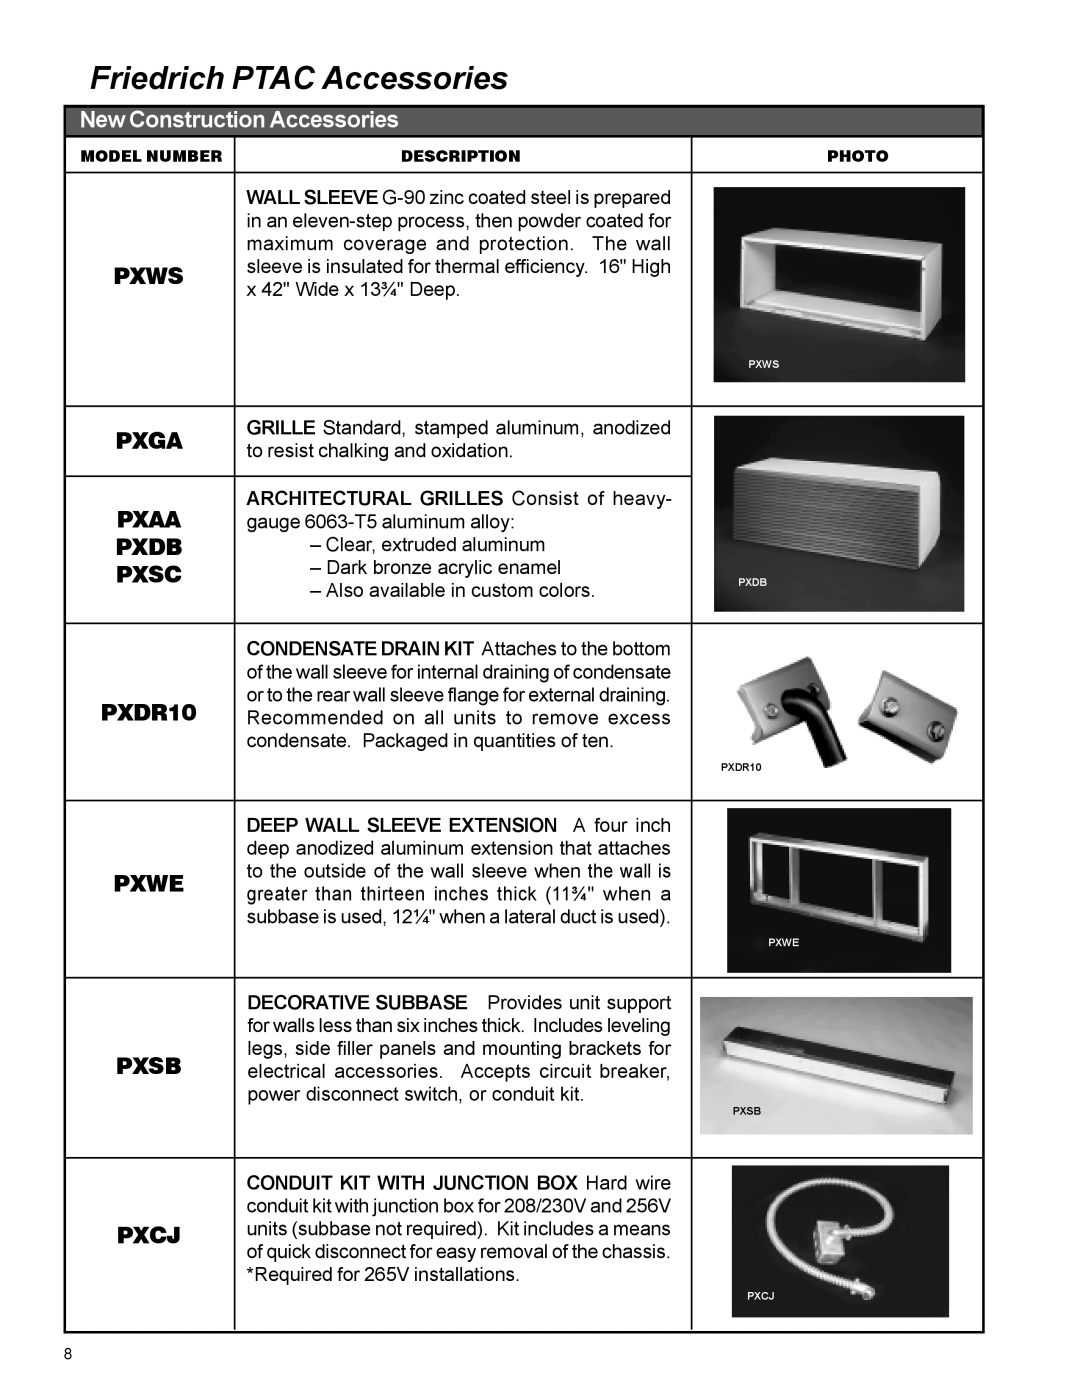 Friedrich PACKAGED TERMINAL AIR CONDITIONERS AND HEAT PUMPS Friedrich PTAC Accessories, New Construction Accessories, Pxws 